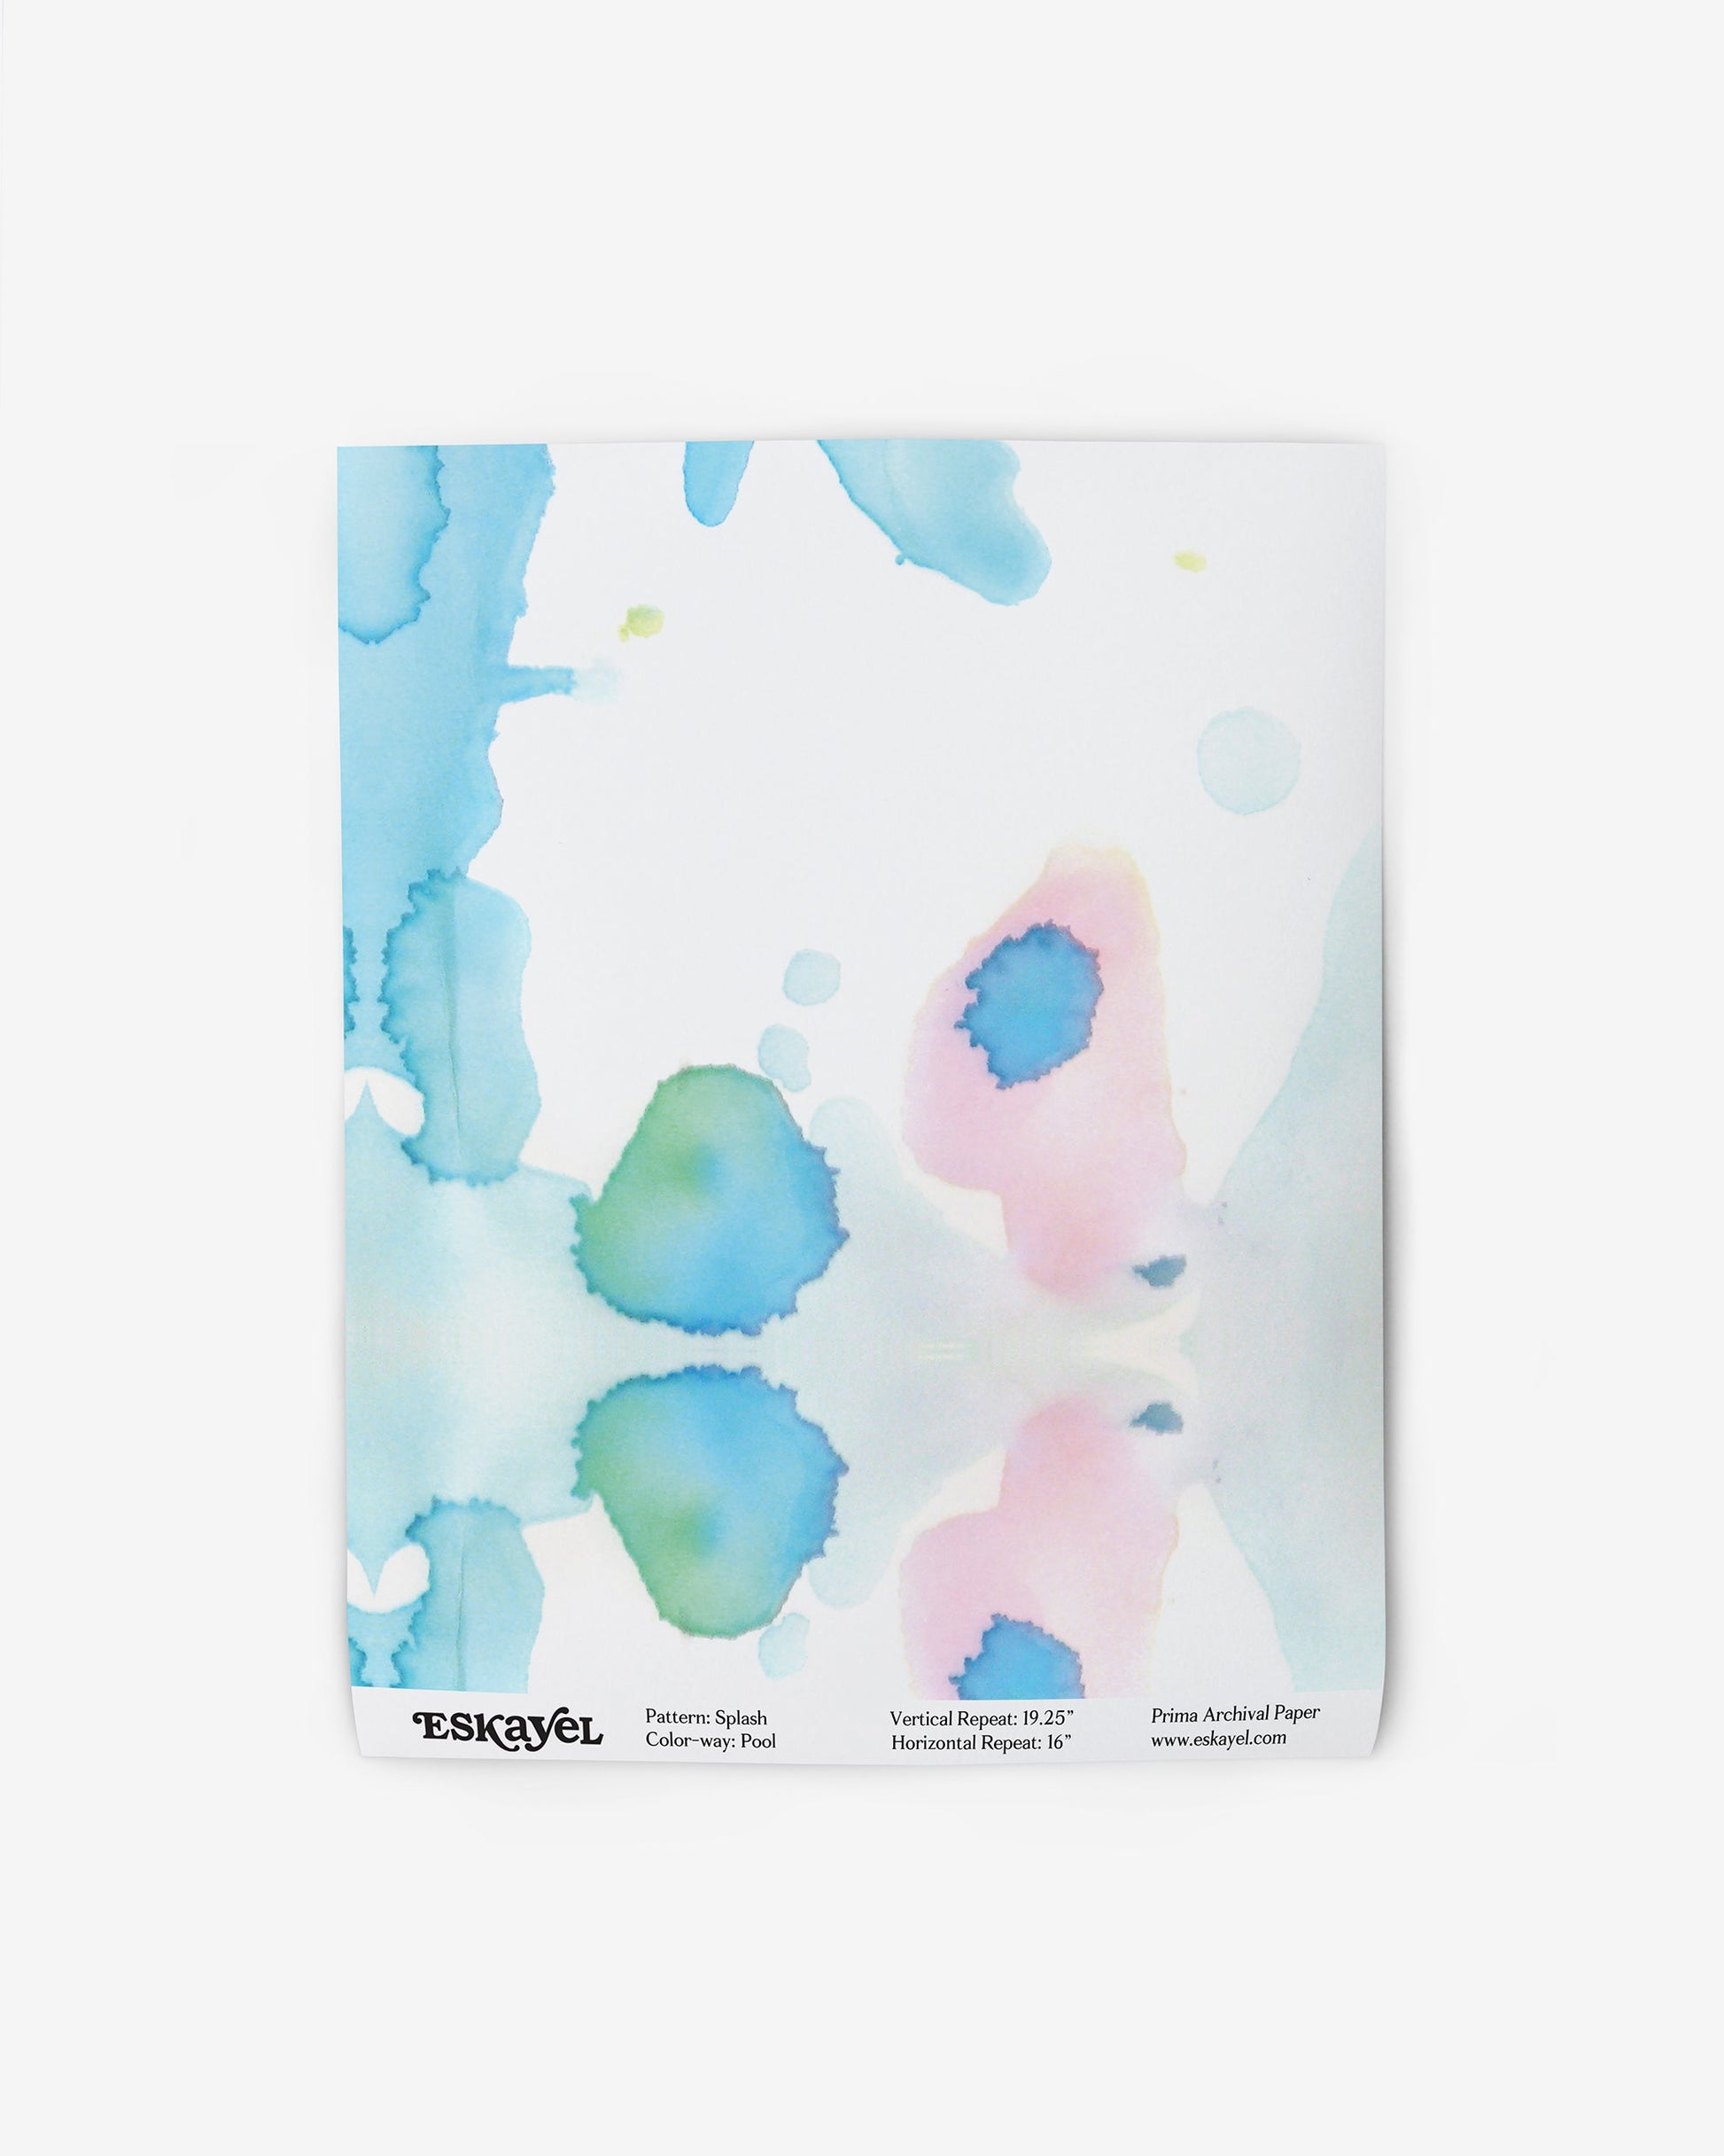 A Splash Wallpaper Pool with watercolor splashes on it